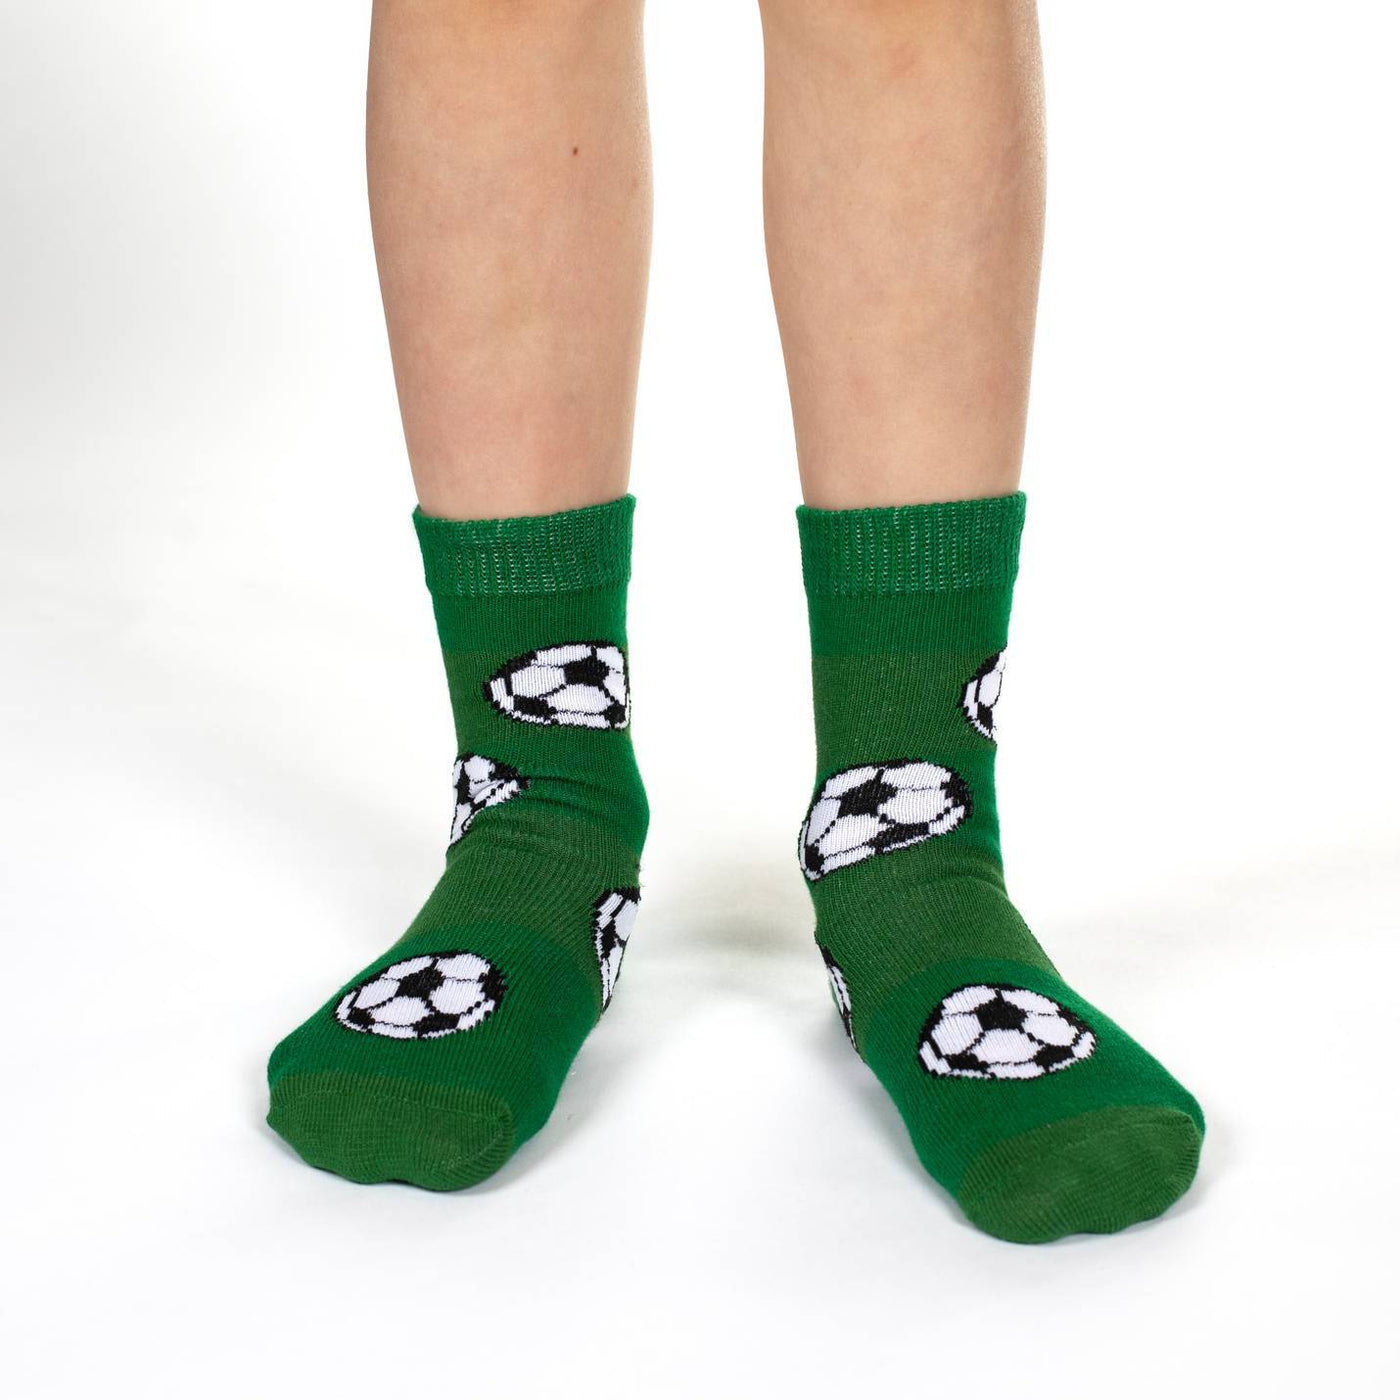 Kids "Bowling, Hockey and Soccer" Socks by Good Luck Sock